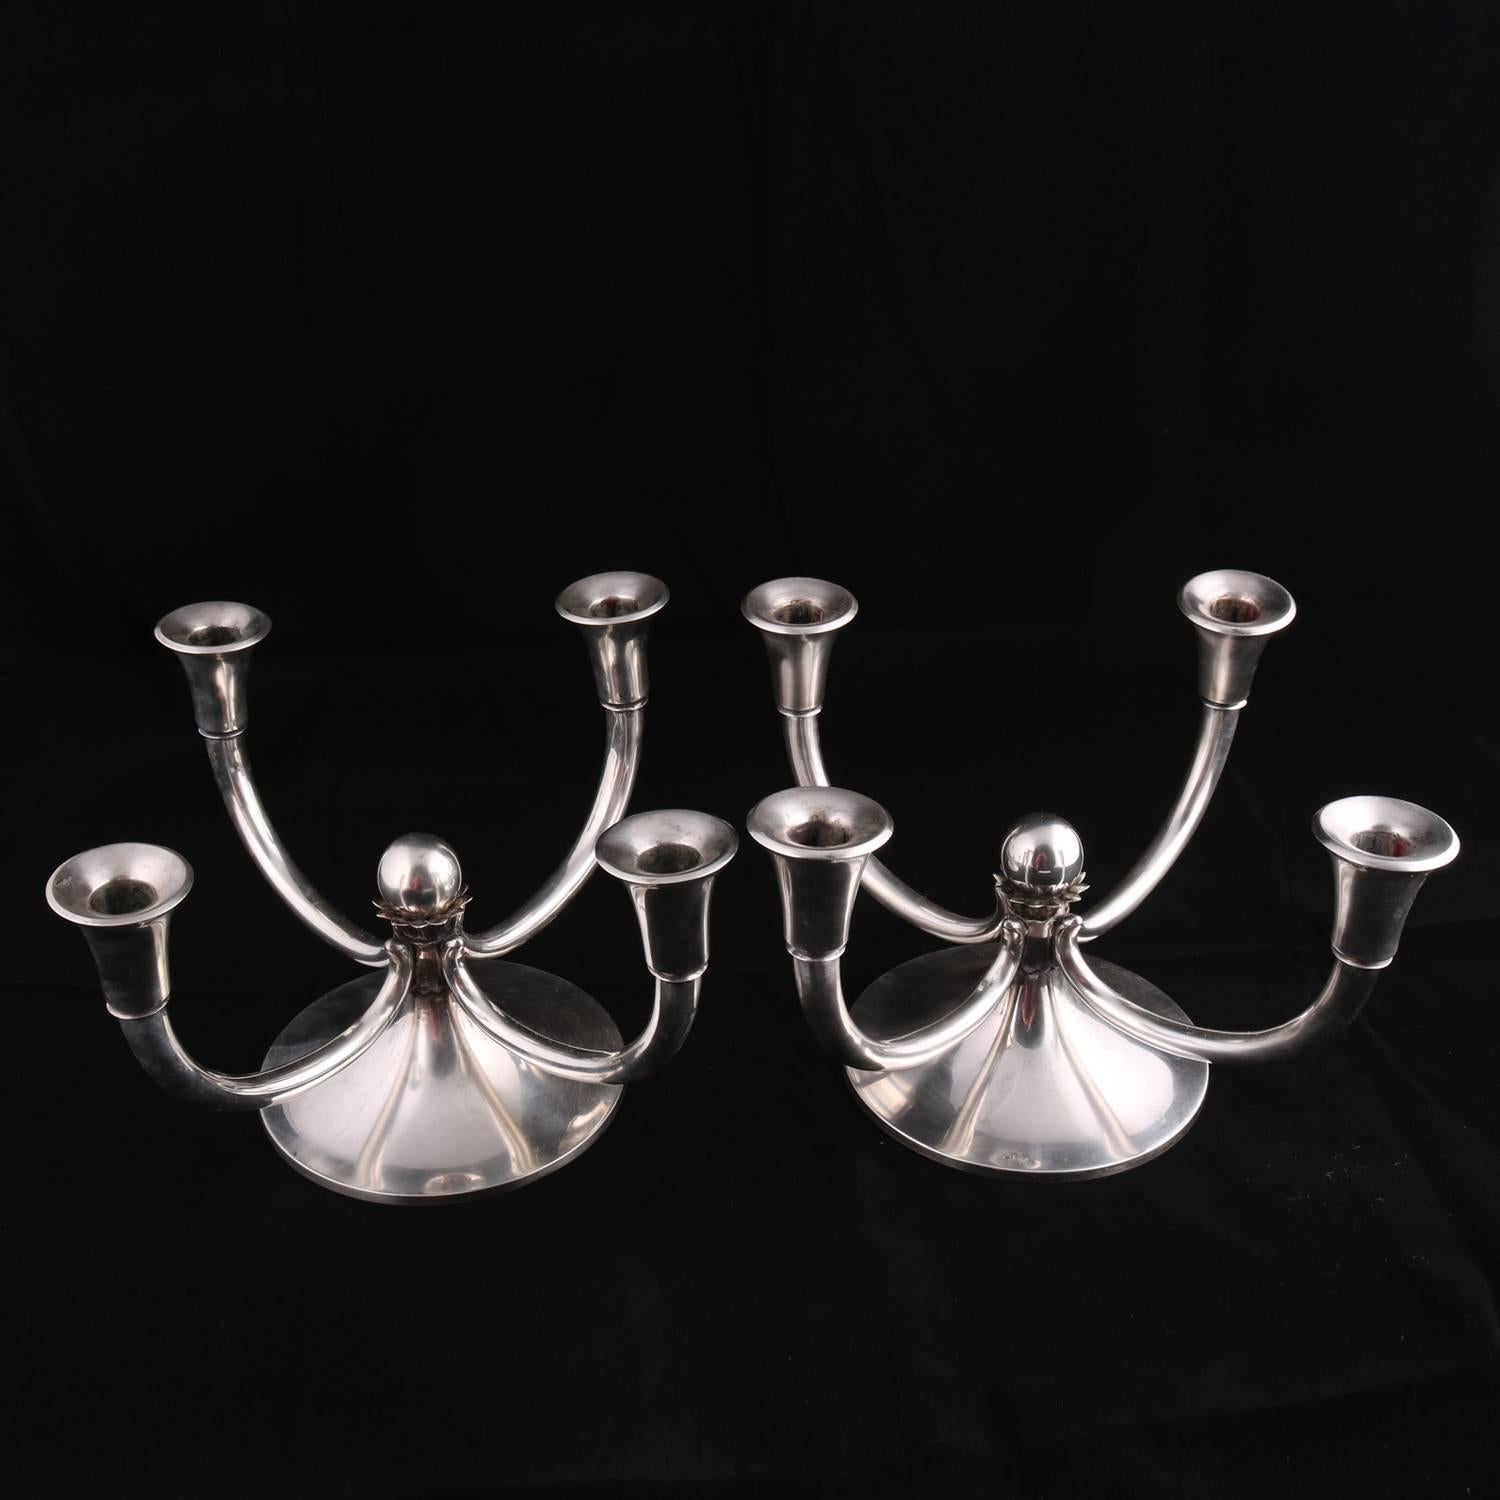 Pair of oversized Georg Jensen School .800 silver candelabra feature conical bases each with ball finial and four upswept arms terminating in flared candle sockets, 56.3 toz, circa 1970

Measures - 8.25